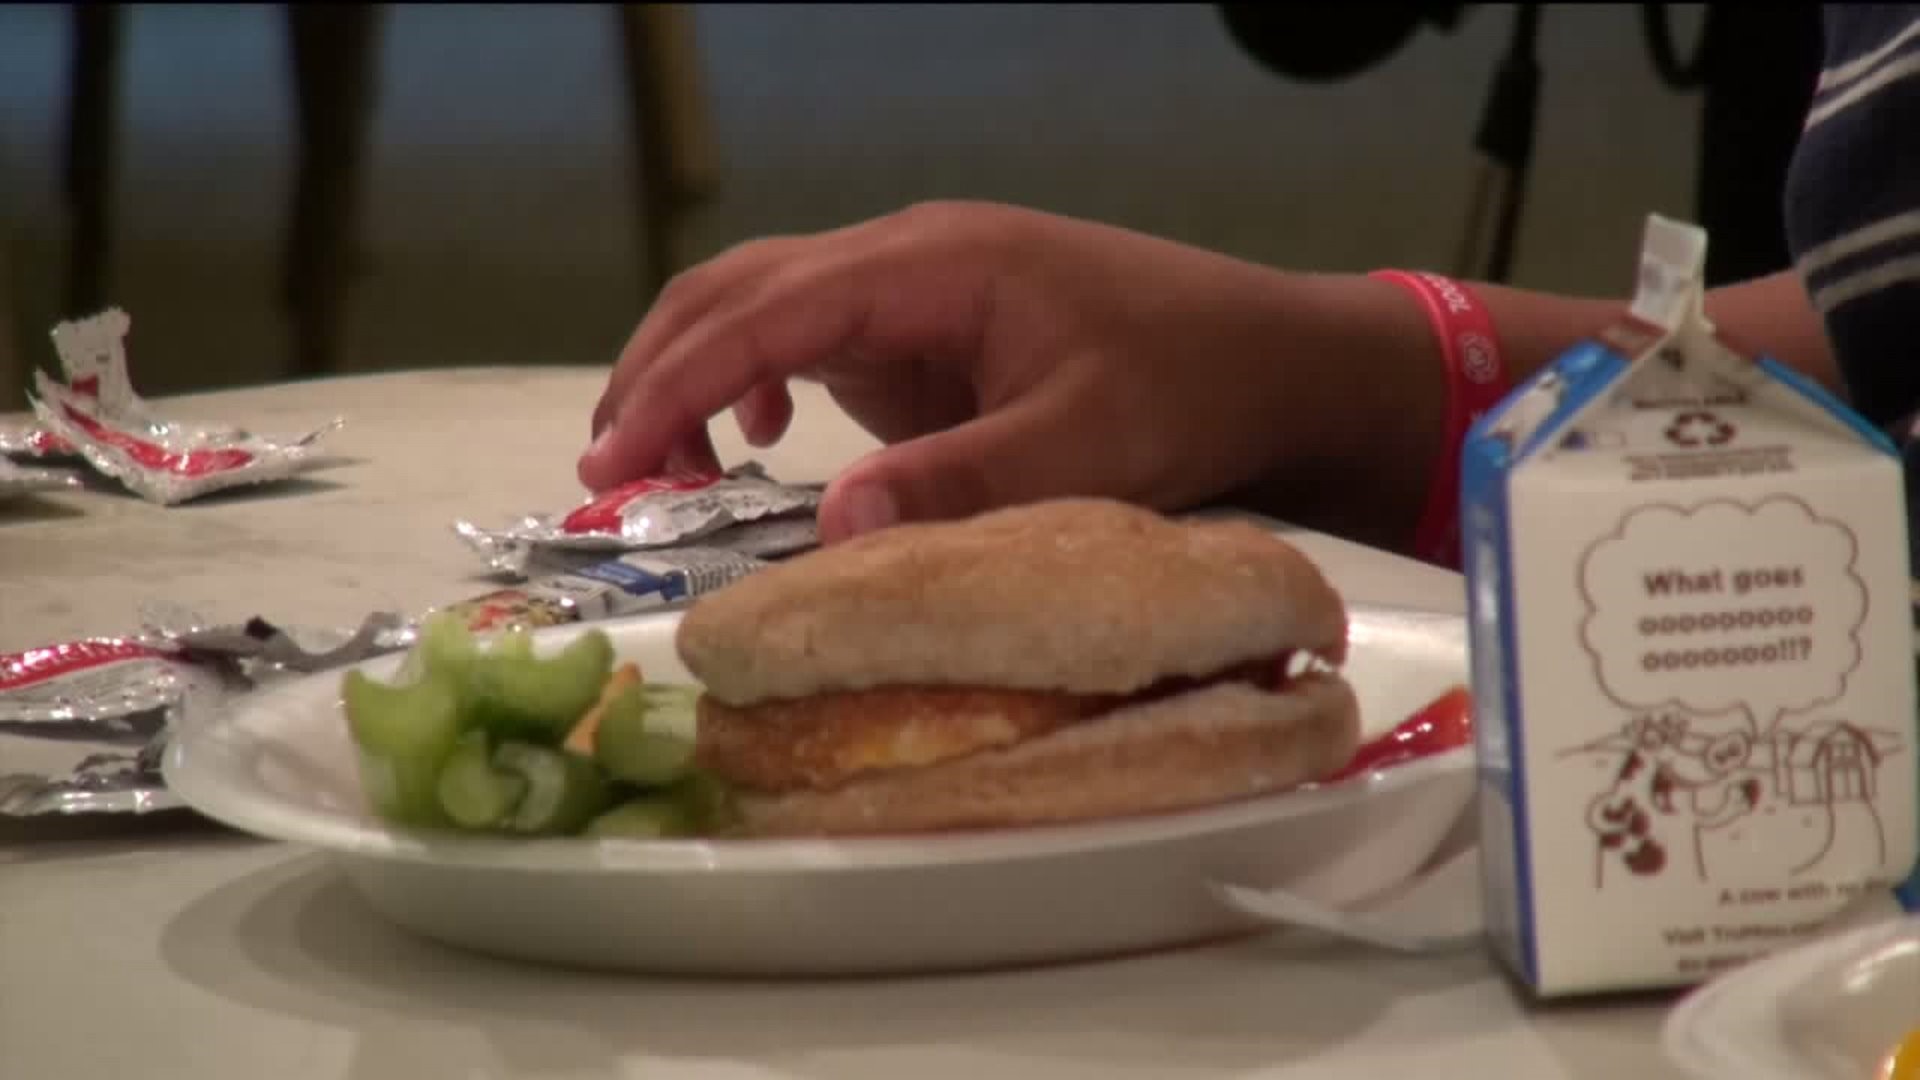 Free Lunches for Kids at A Pocono Country Place